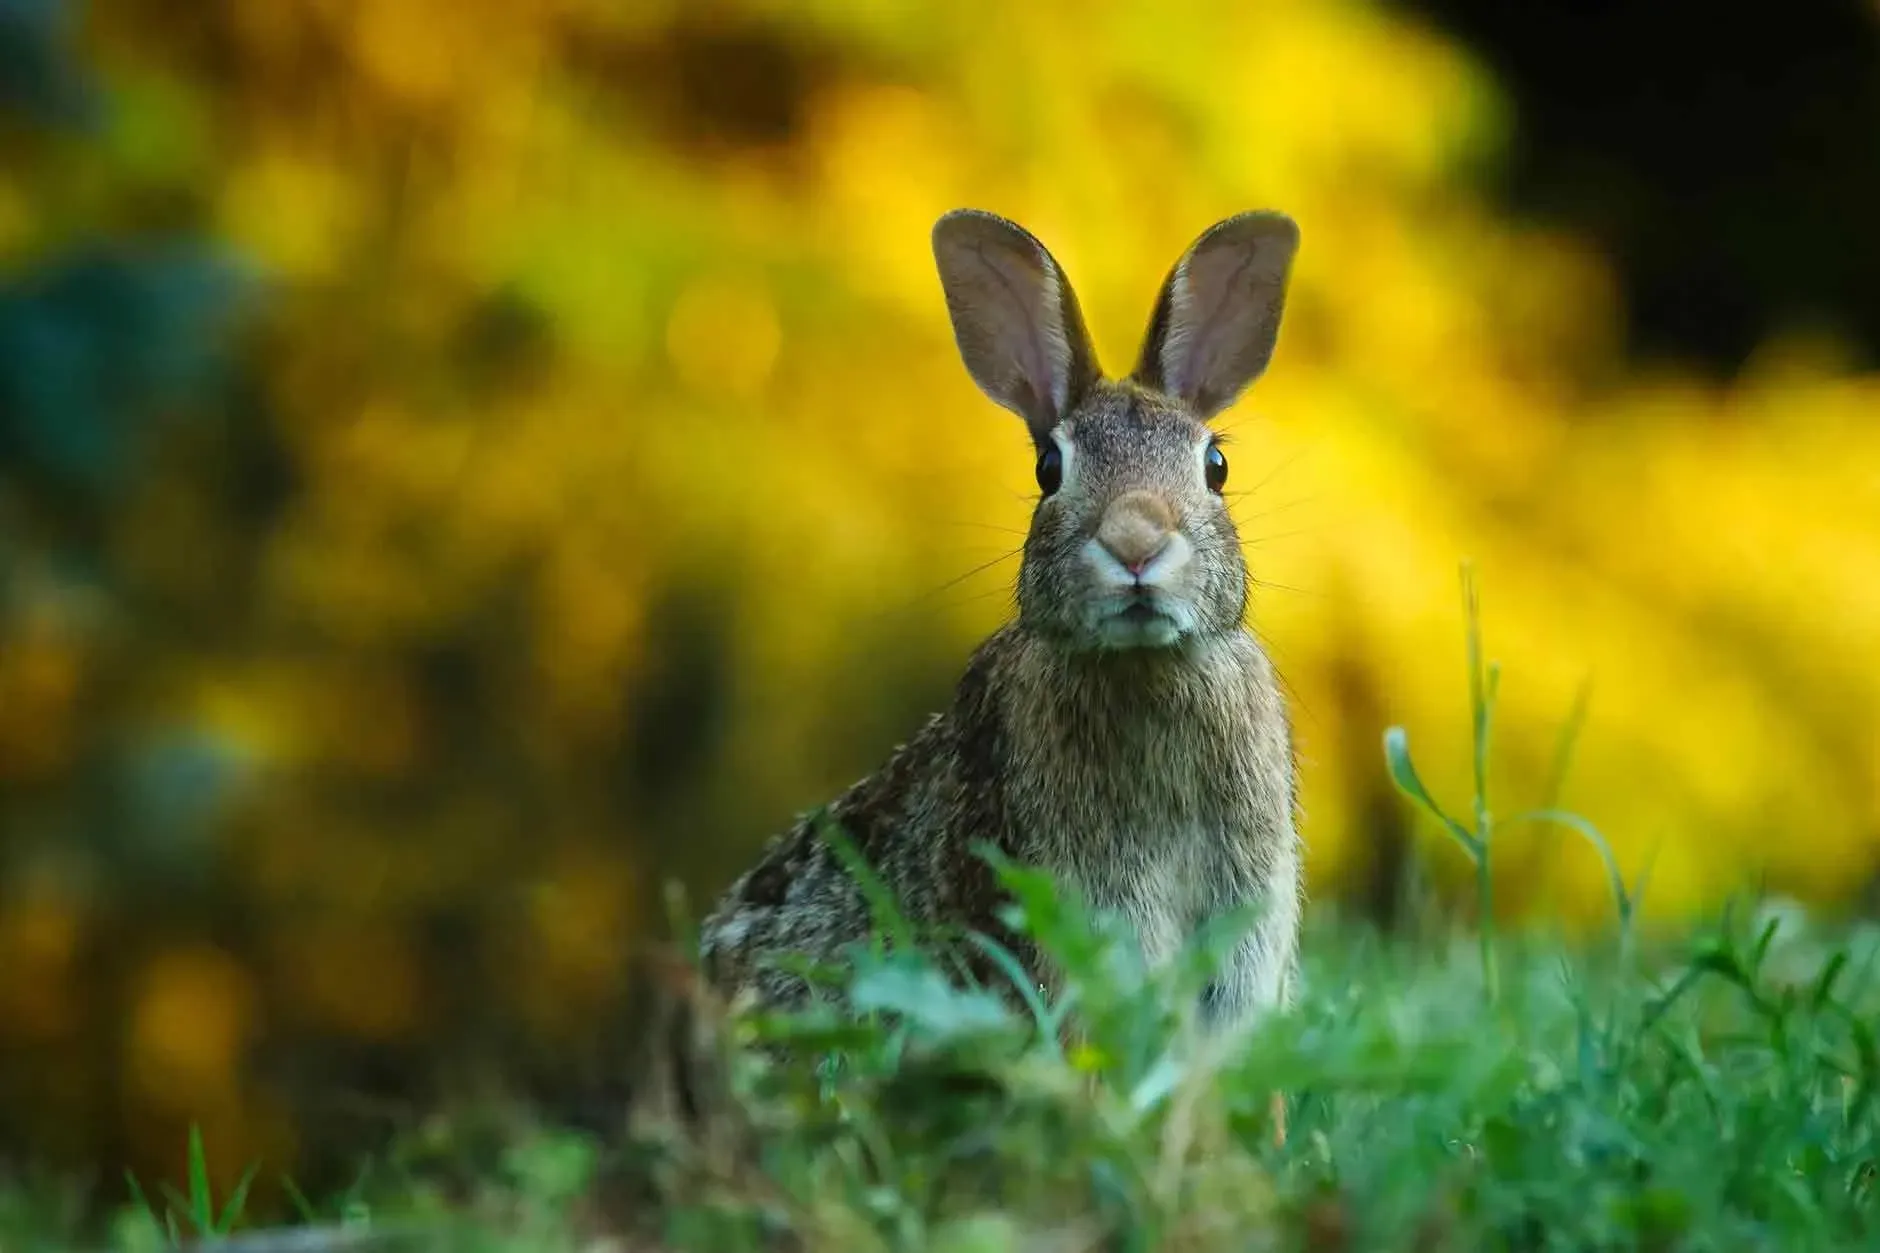 What is your favorite quote from 'Watership Down'?